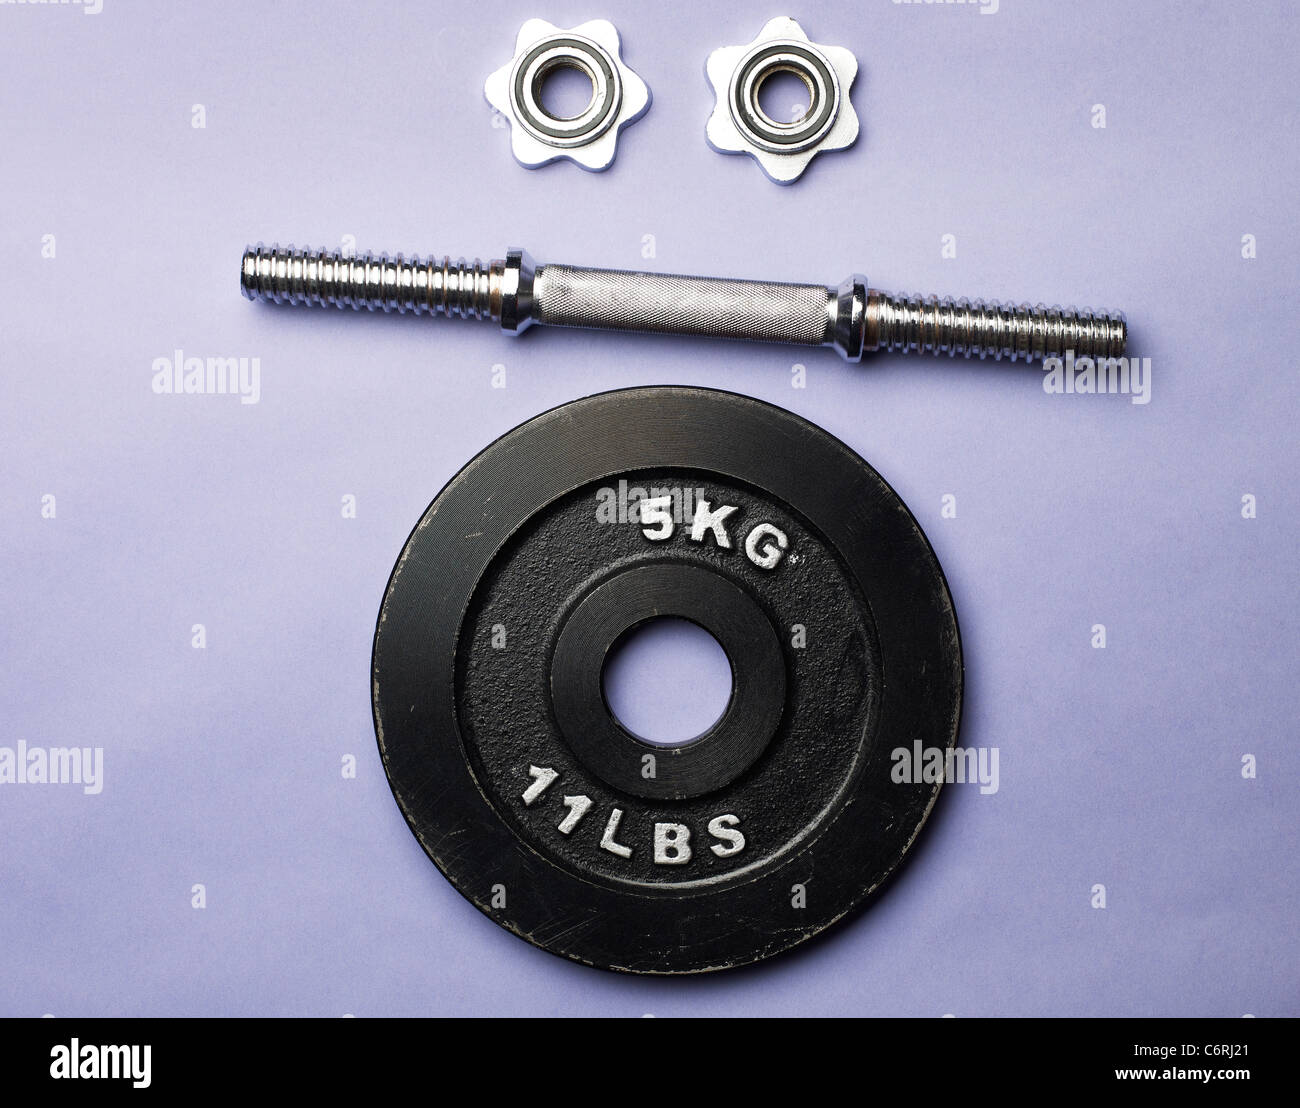 Deconstructed dumbbell weight in the shape of a face Stock Photo